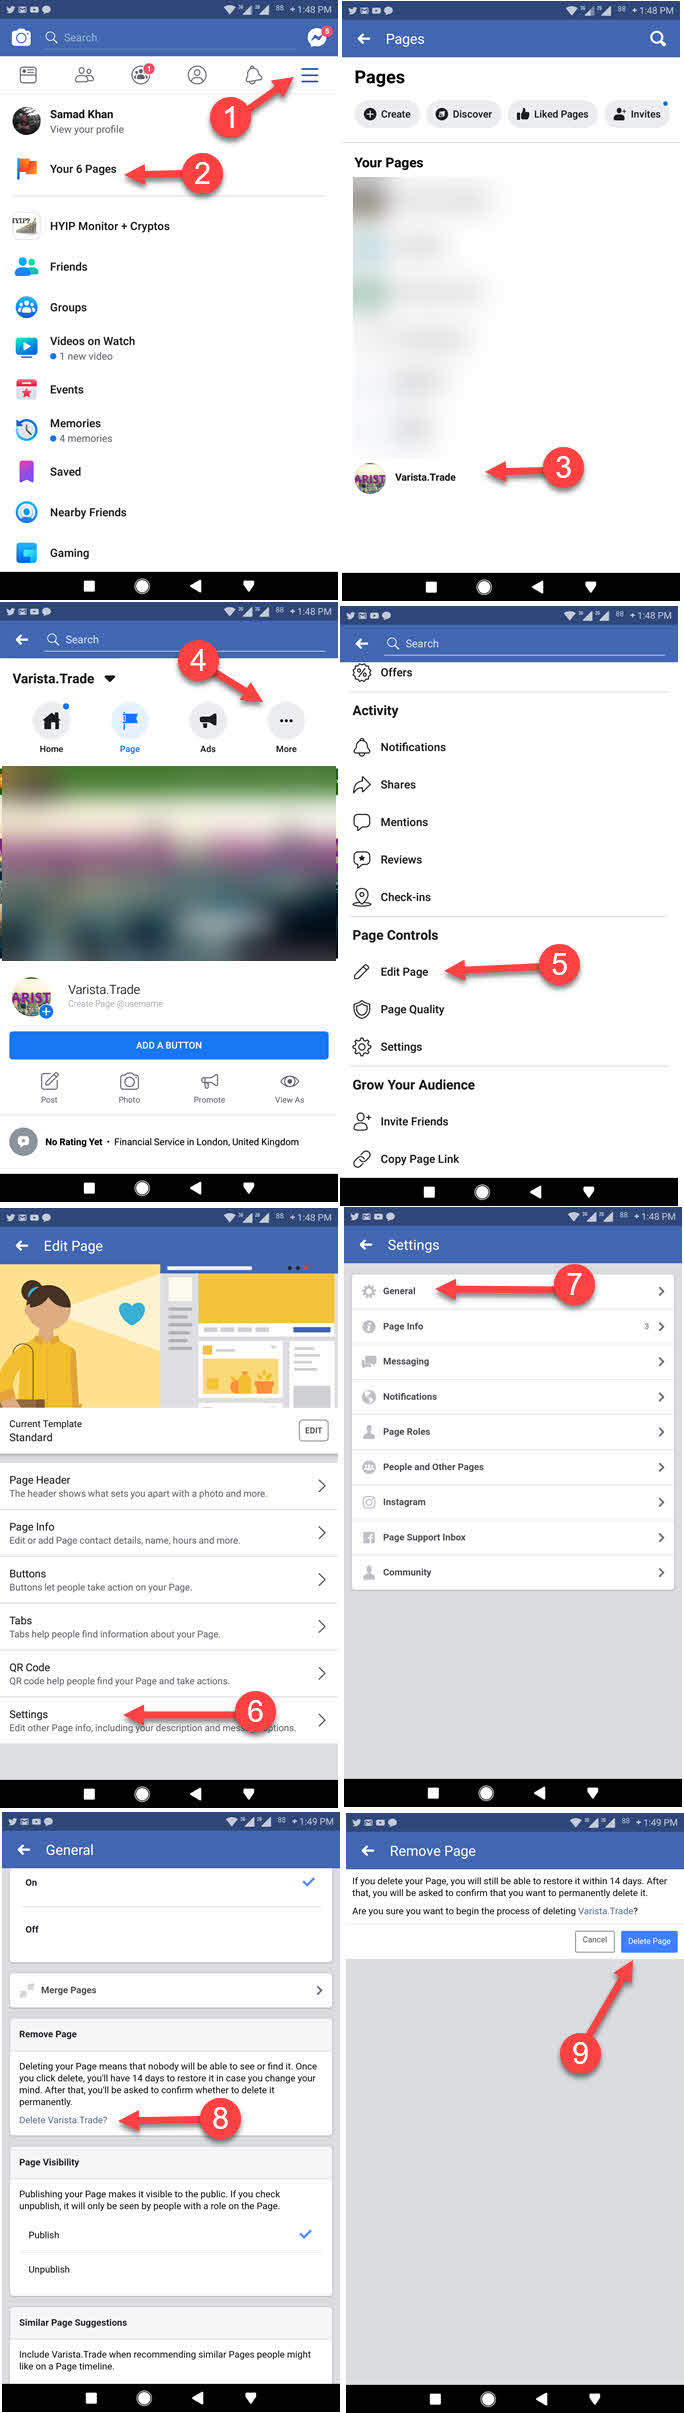 How to delete a Facebook page on Mobile app